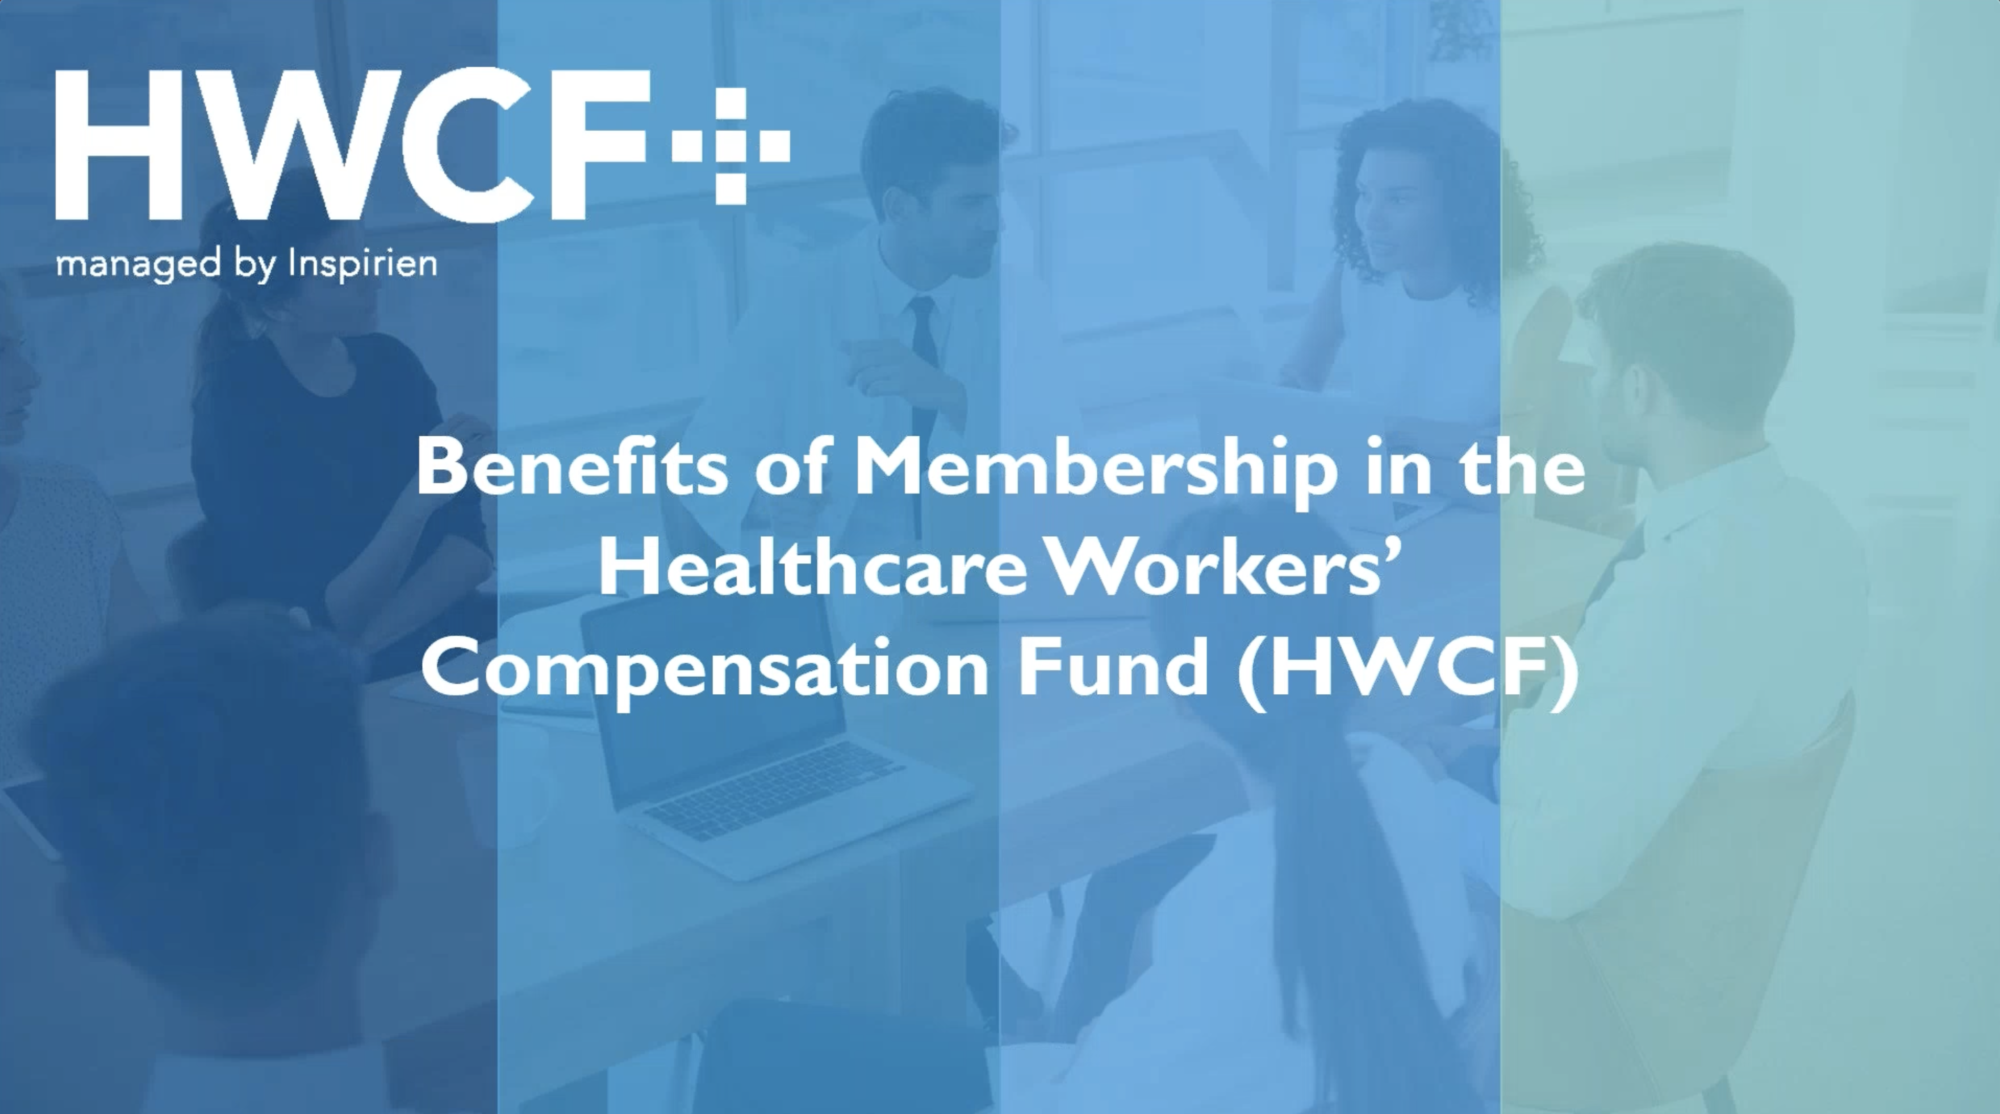 Benefits of Membership in the Healthcare Worker’s Compensation Fund